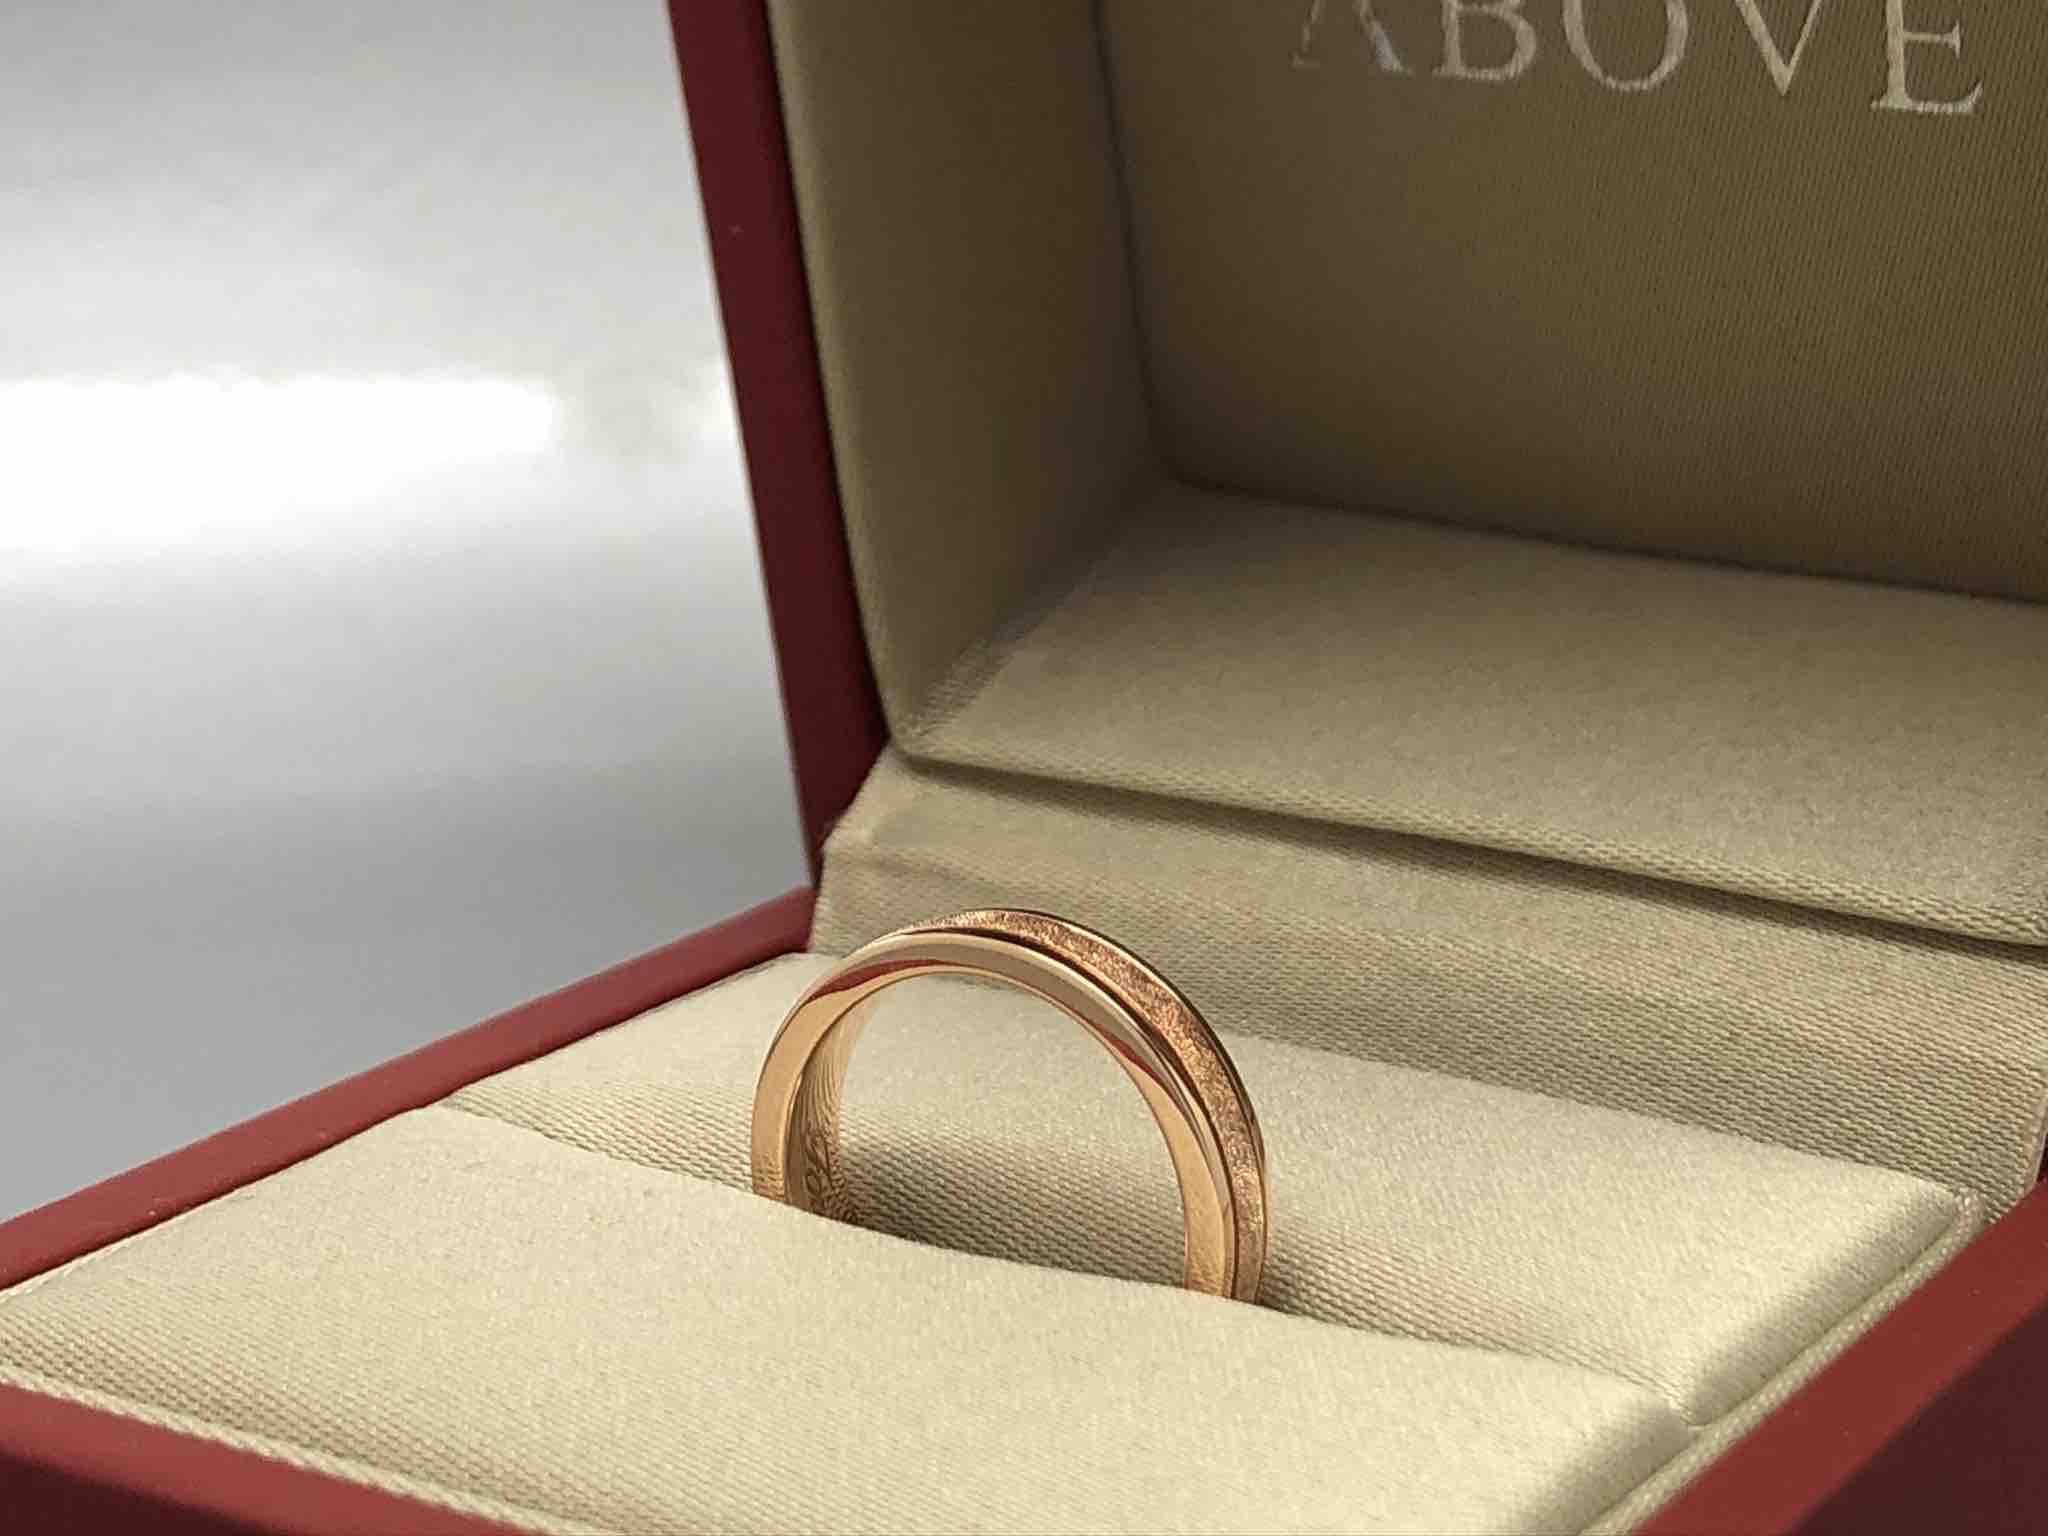 Width of rosegold ring